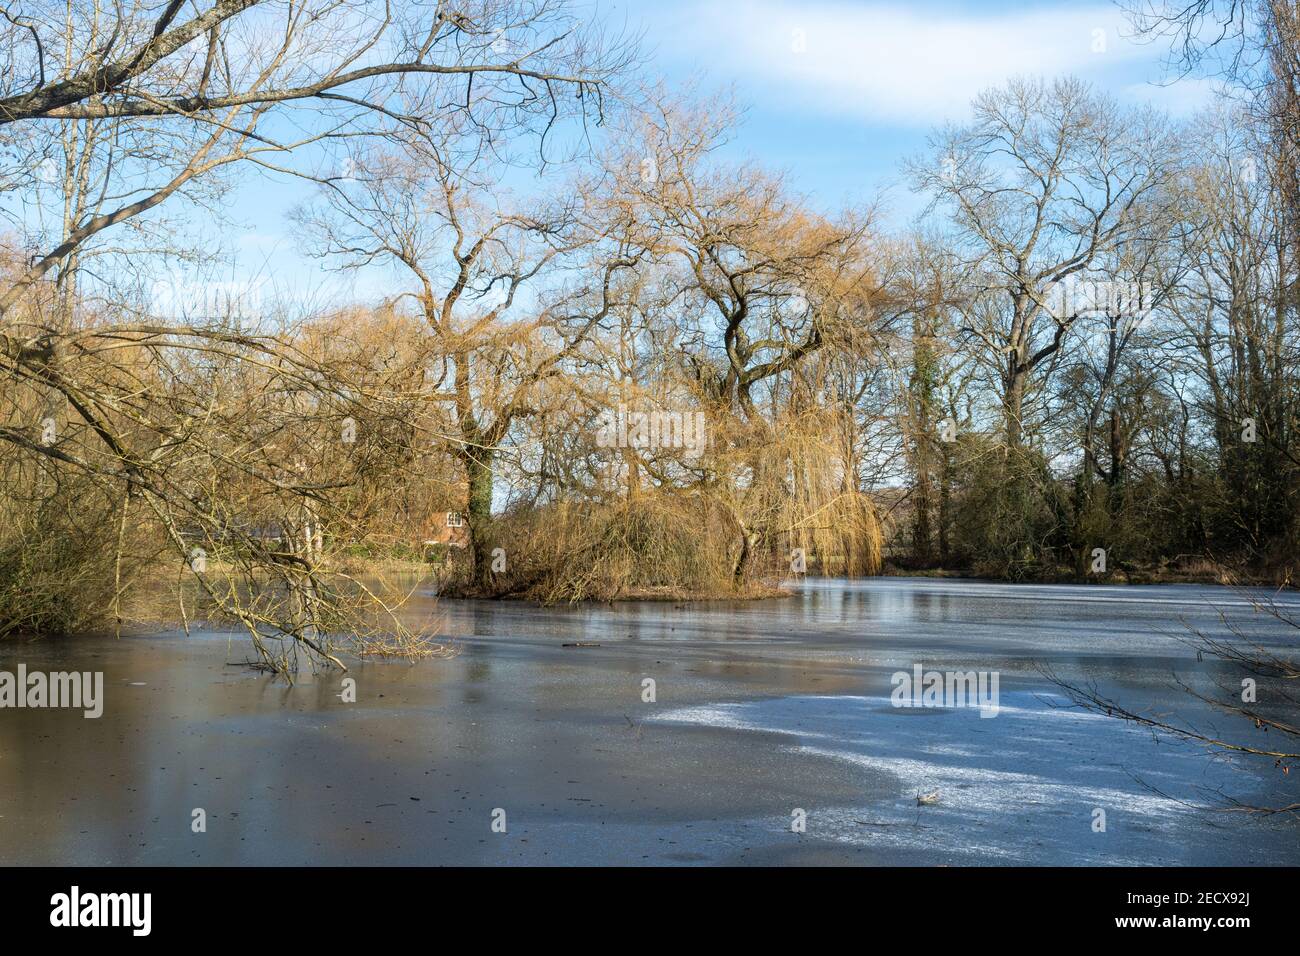 Frozen fishing pond called Wilks Water near the Basingstoke Canal at Odiham, Hampshire, UK, during winter or February Stock Photo